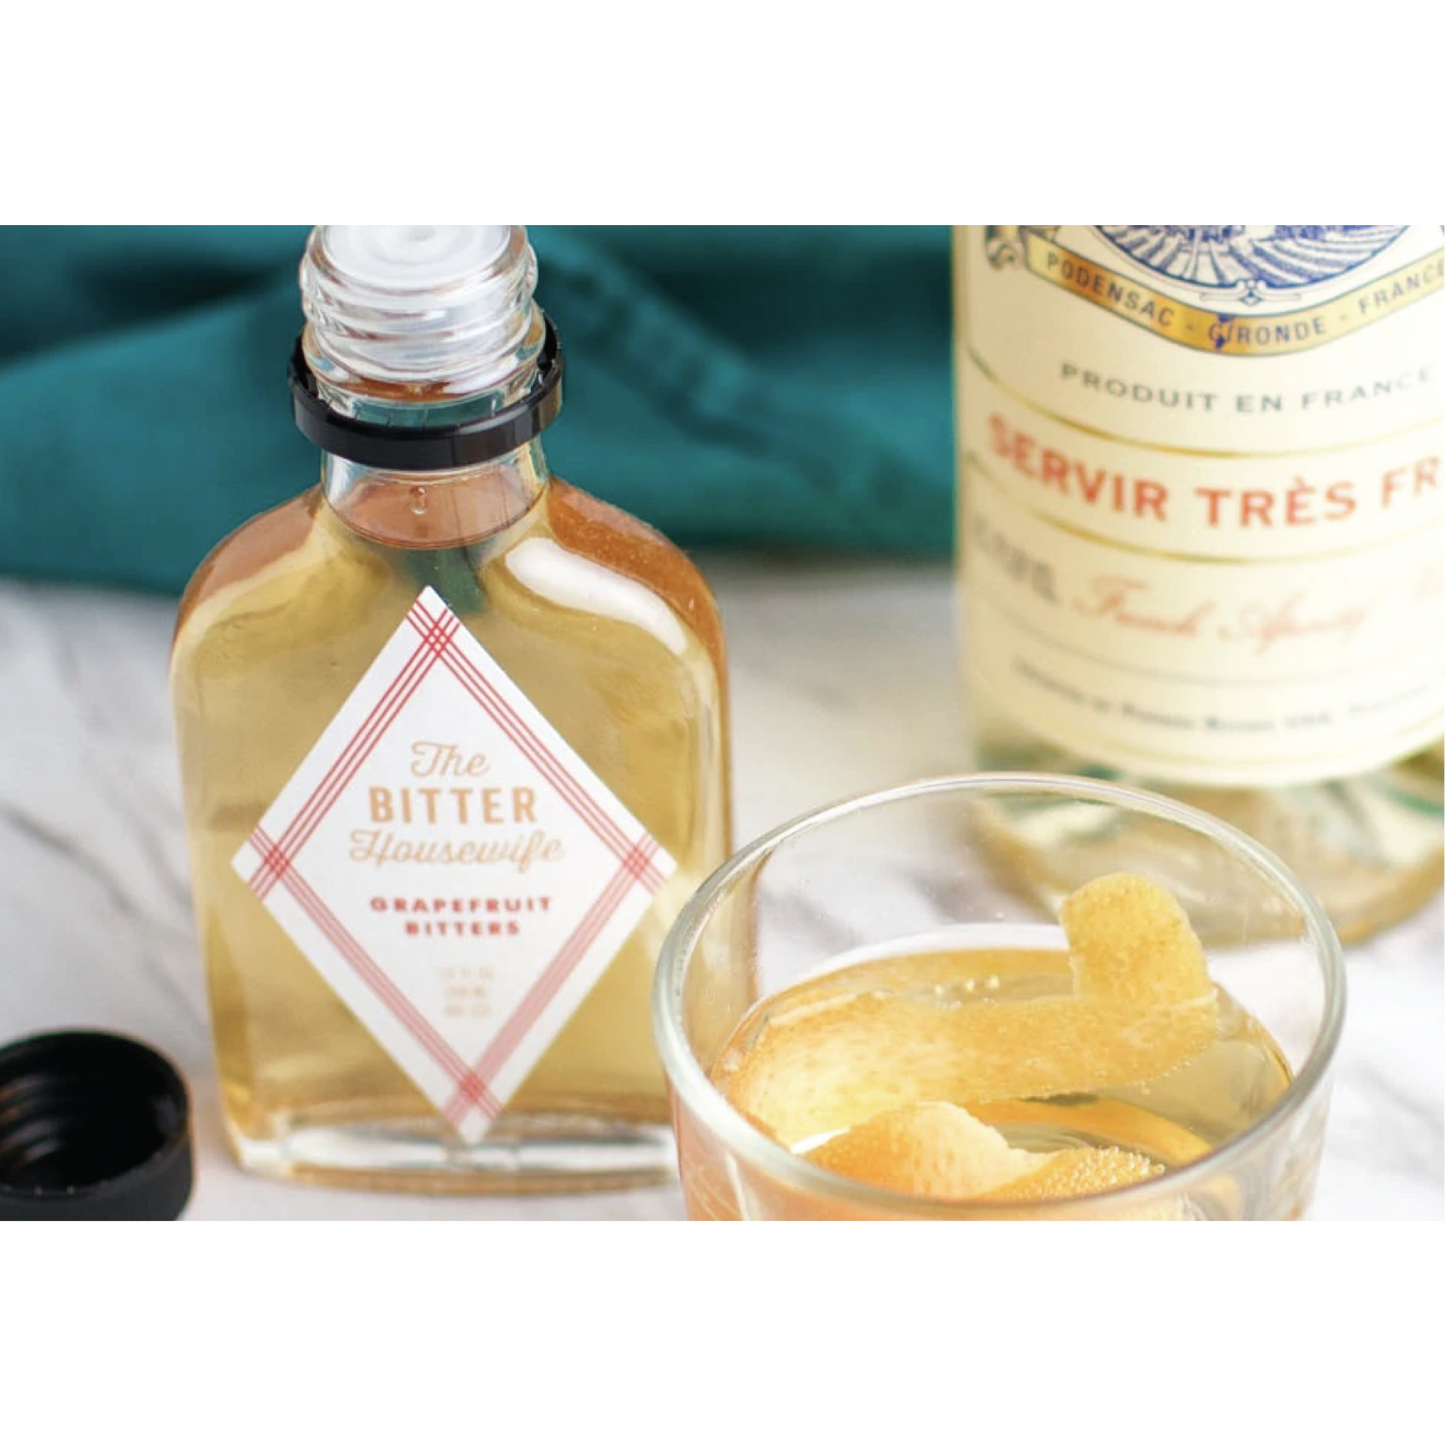 The Bitter Housewife's Grapefruit Bitters, 100ml